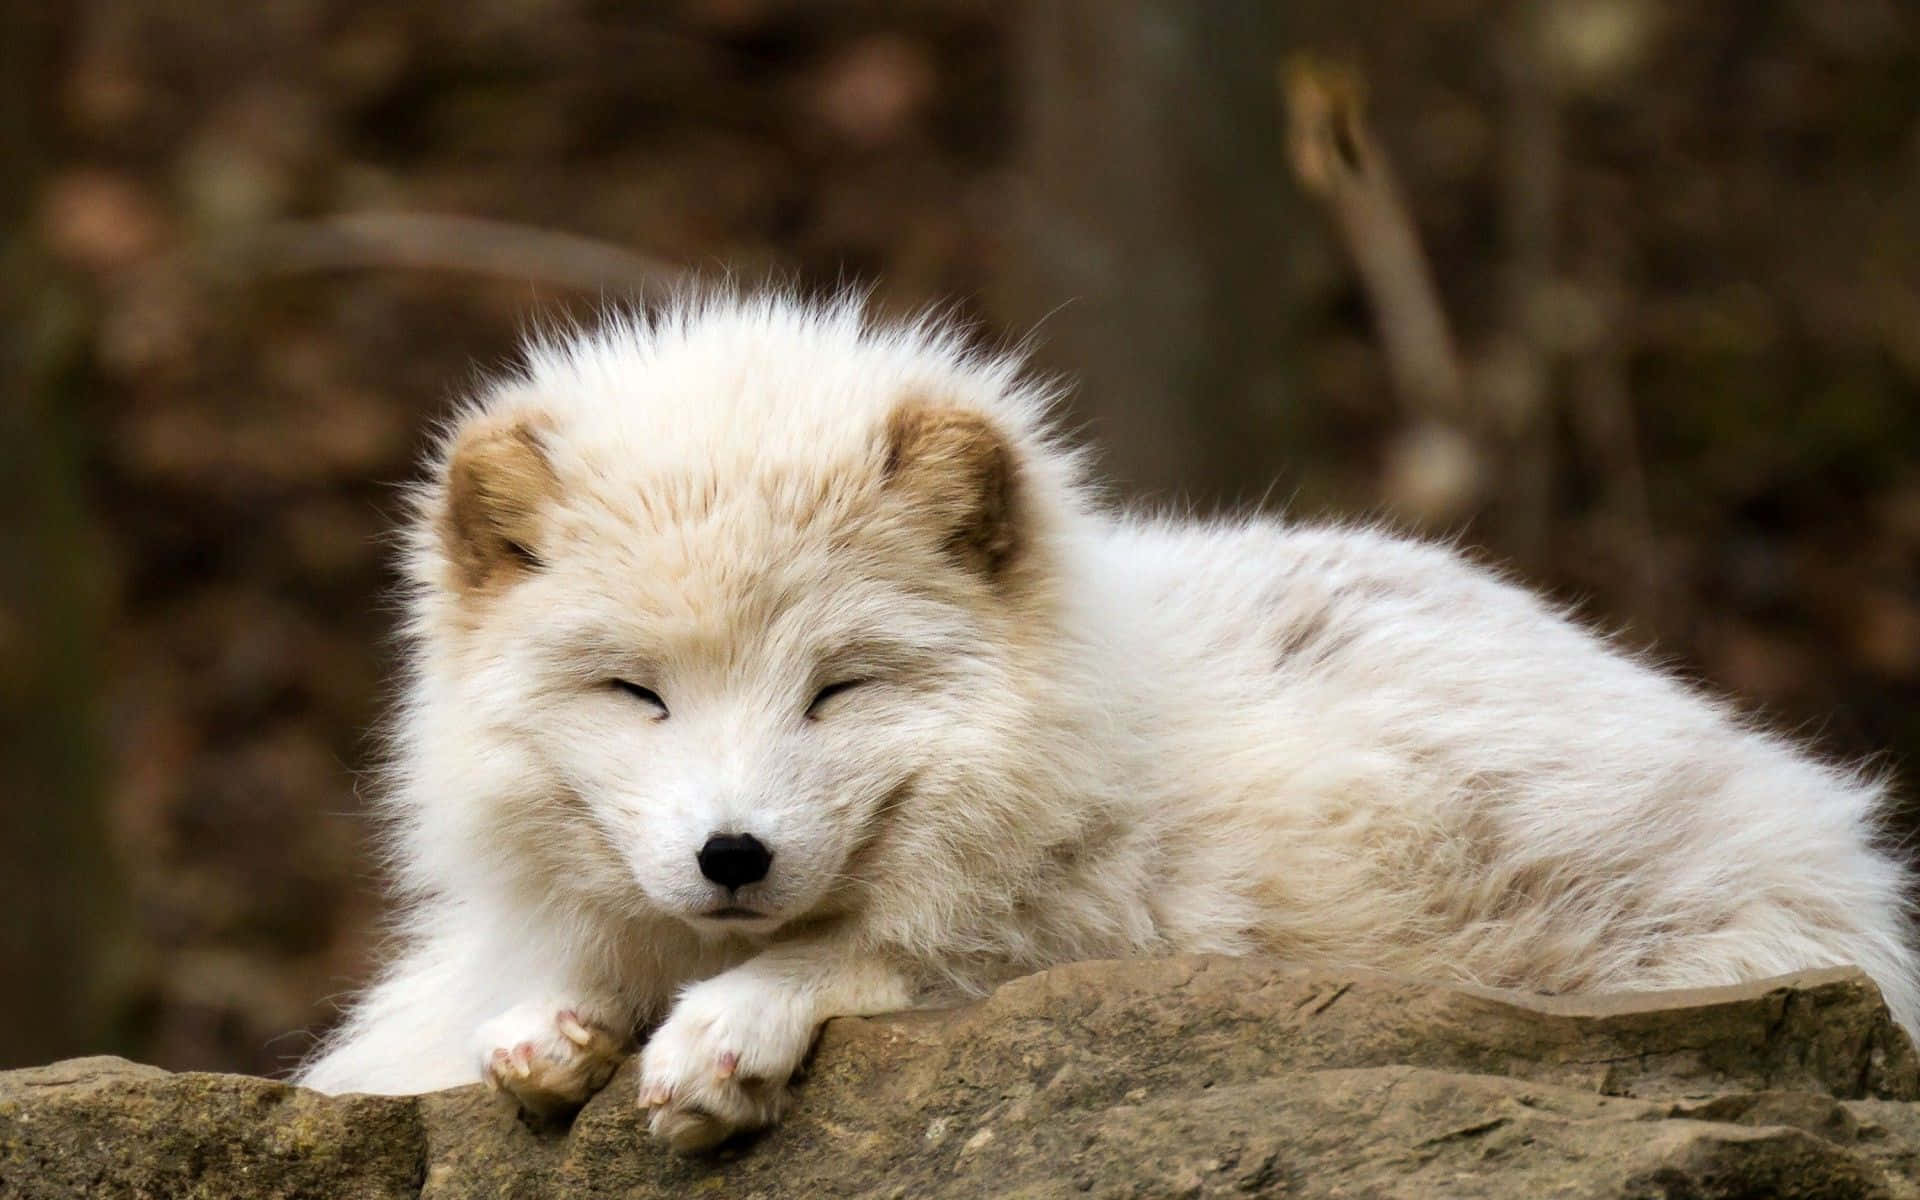 A beautiful Arctic Fox in its natural environment